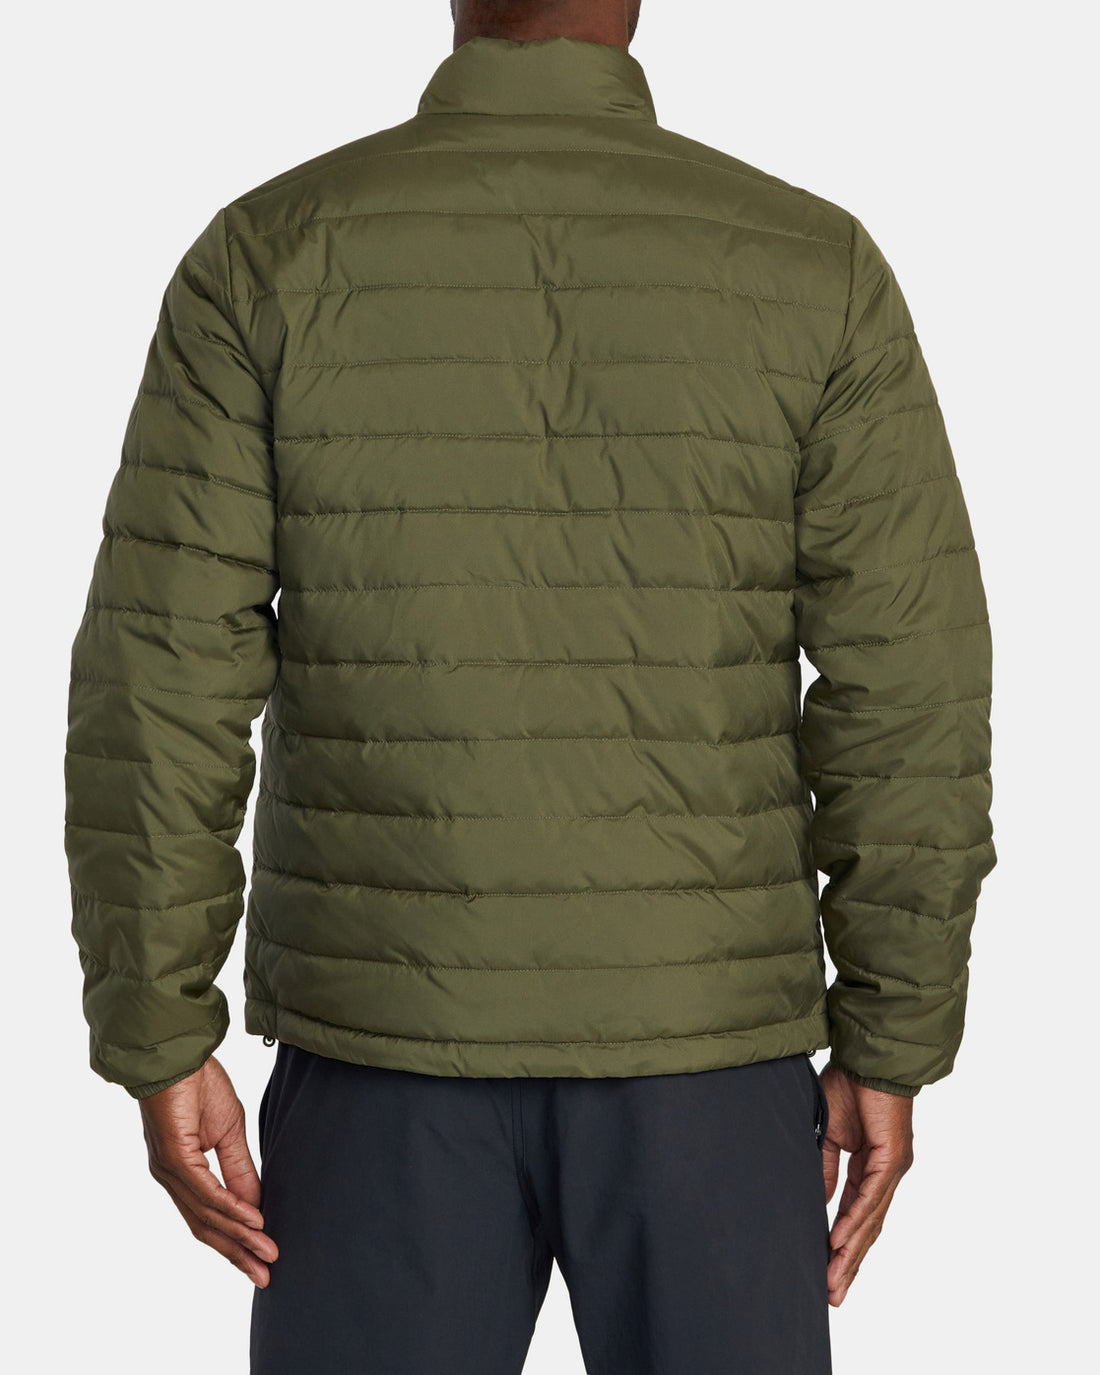 RVCA PACKABLE PUFFA JACKET - ARMY